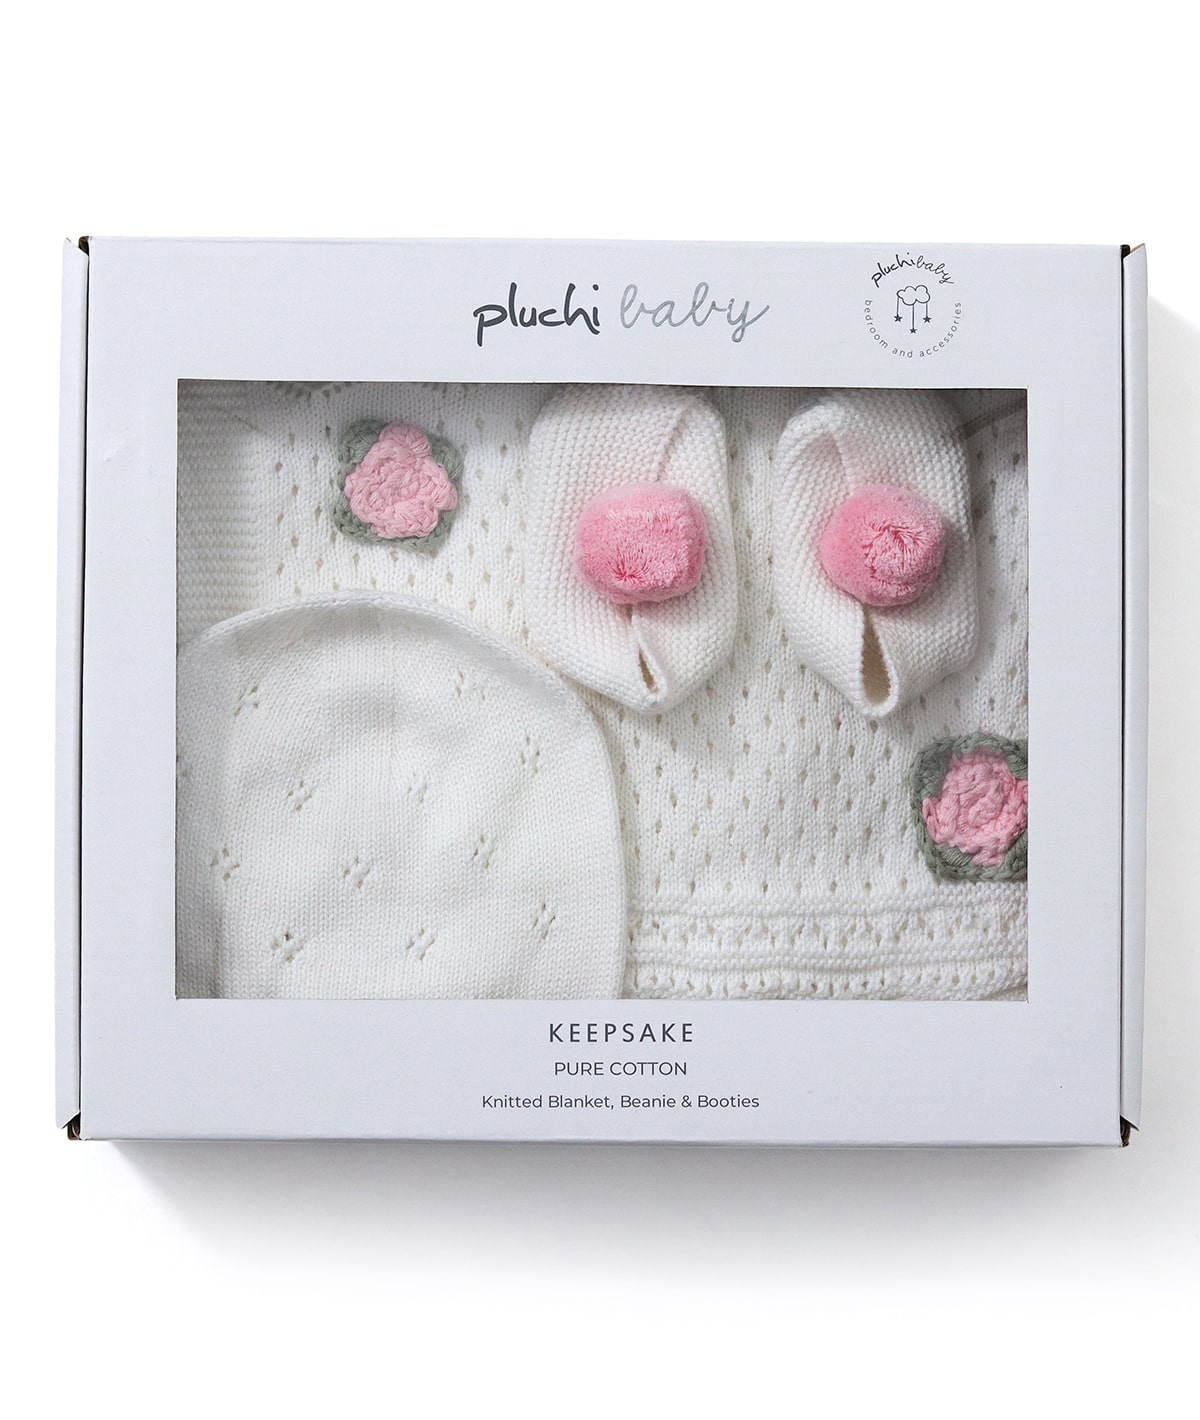 Keepsake Baby Gift Set- Crochet Knit Blanket with Hand Crochet Flowers with Booties & Cap in Box Packing